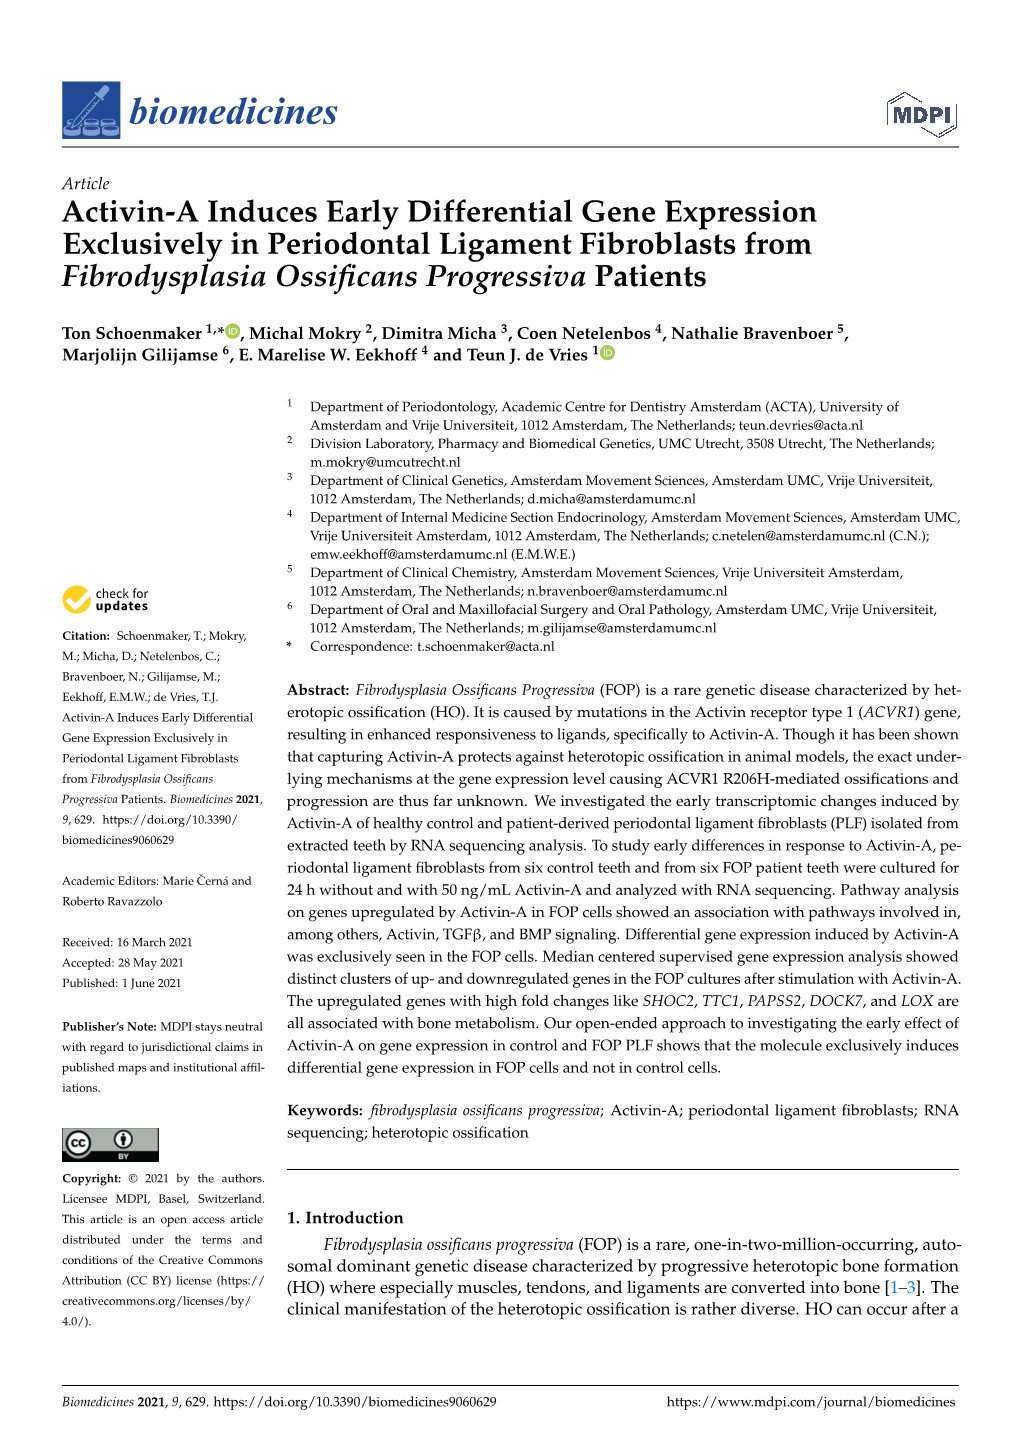 Activin-A Induces Early Differential Gene Expression Exclusively in Periodontal Ligament Fibroblasts from Fibrodysplasia Ossiﬁcans Progressiva Patients